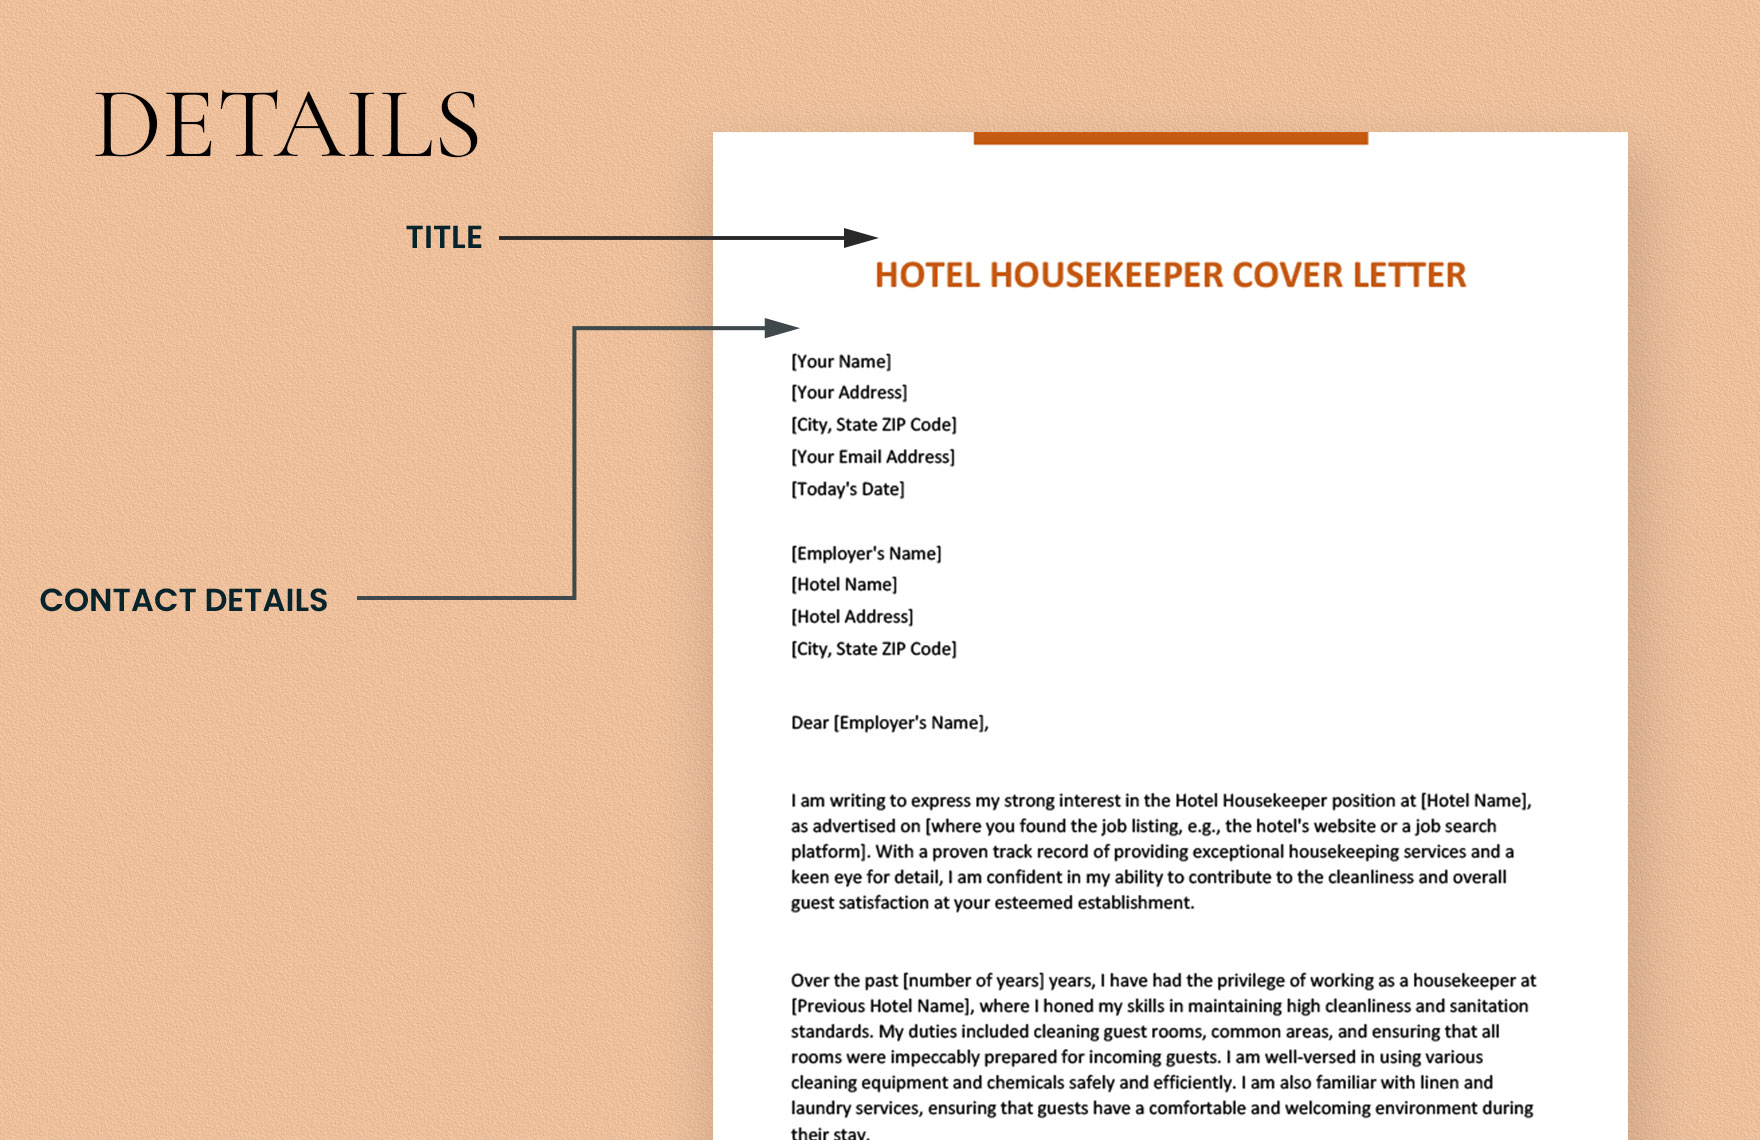 Hotel Housekeeper Cover Letter